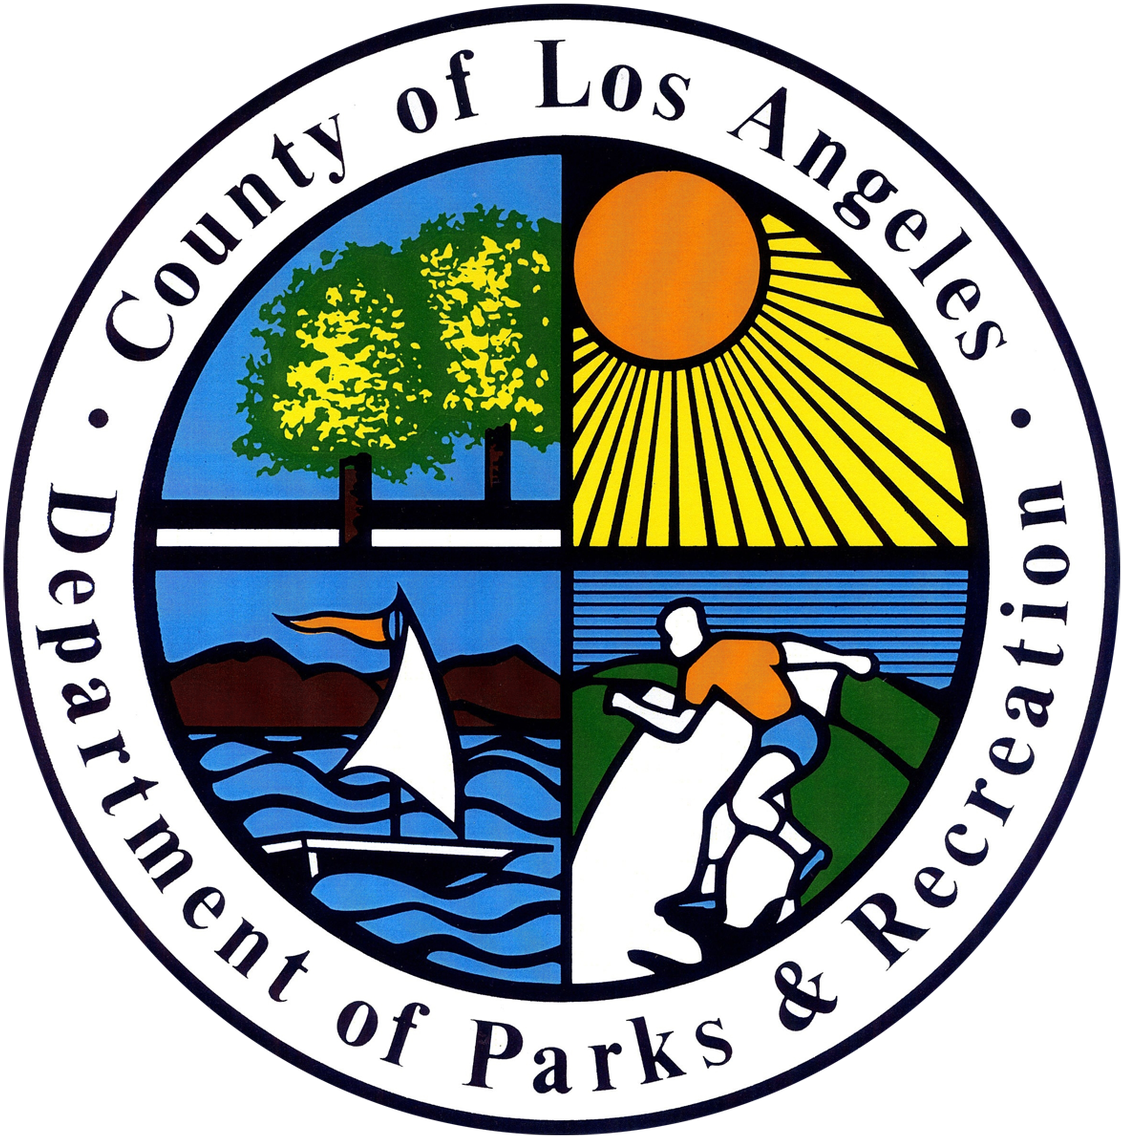 We Placed First Among Four Innovation Winners In Health, - County Of Los Angeles Department Of Parks (1146x1200)